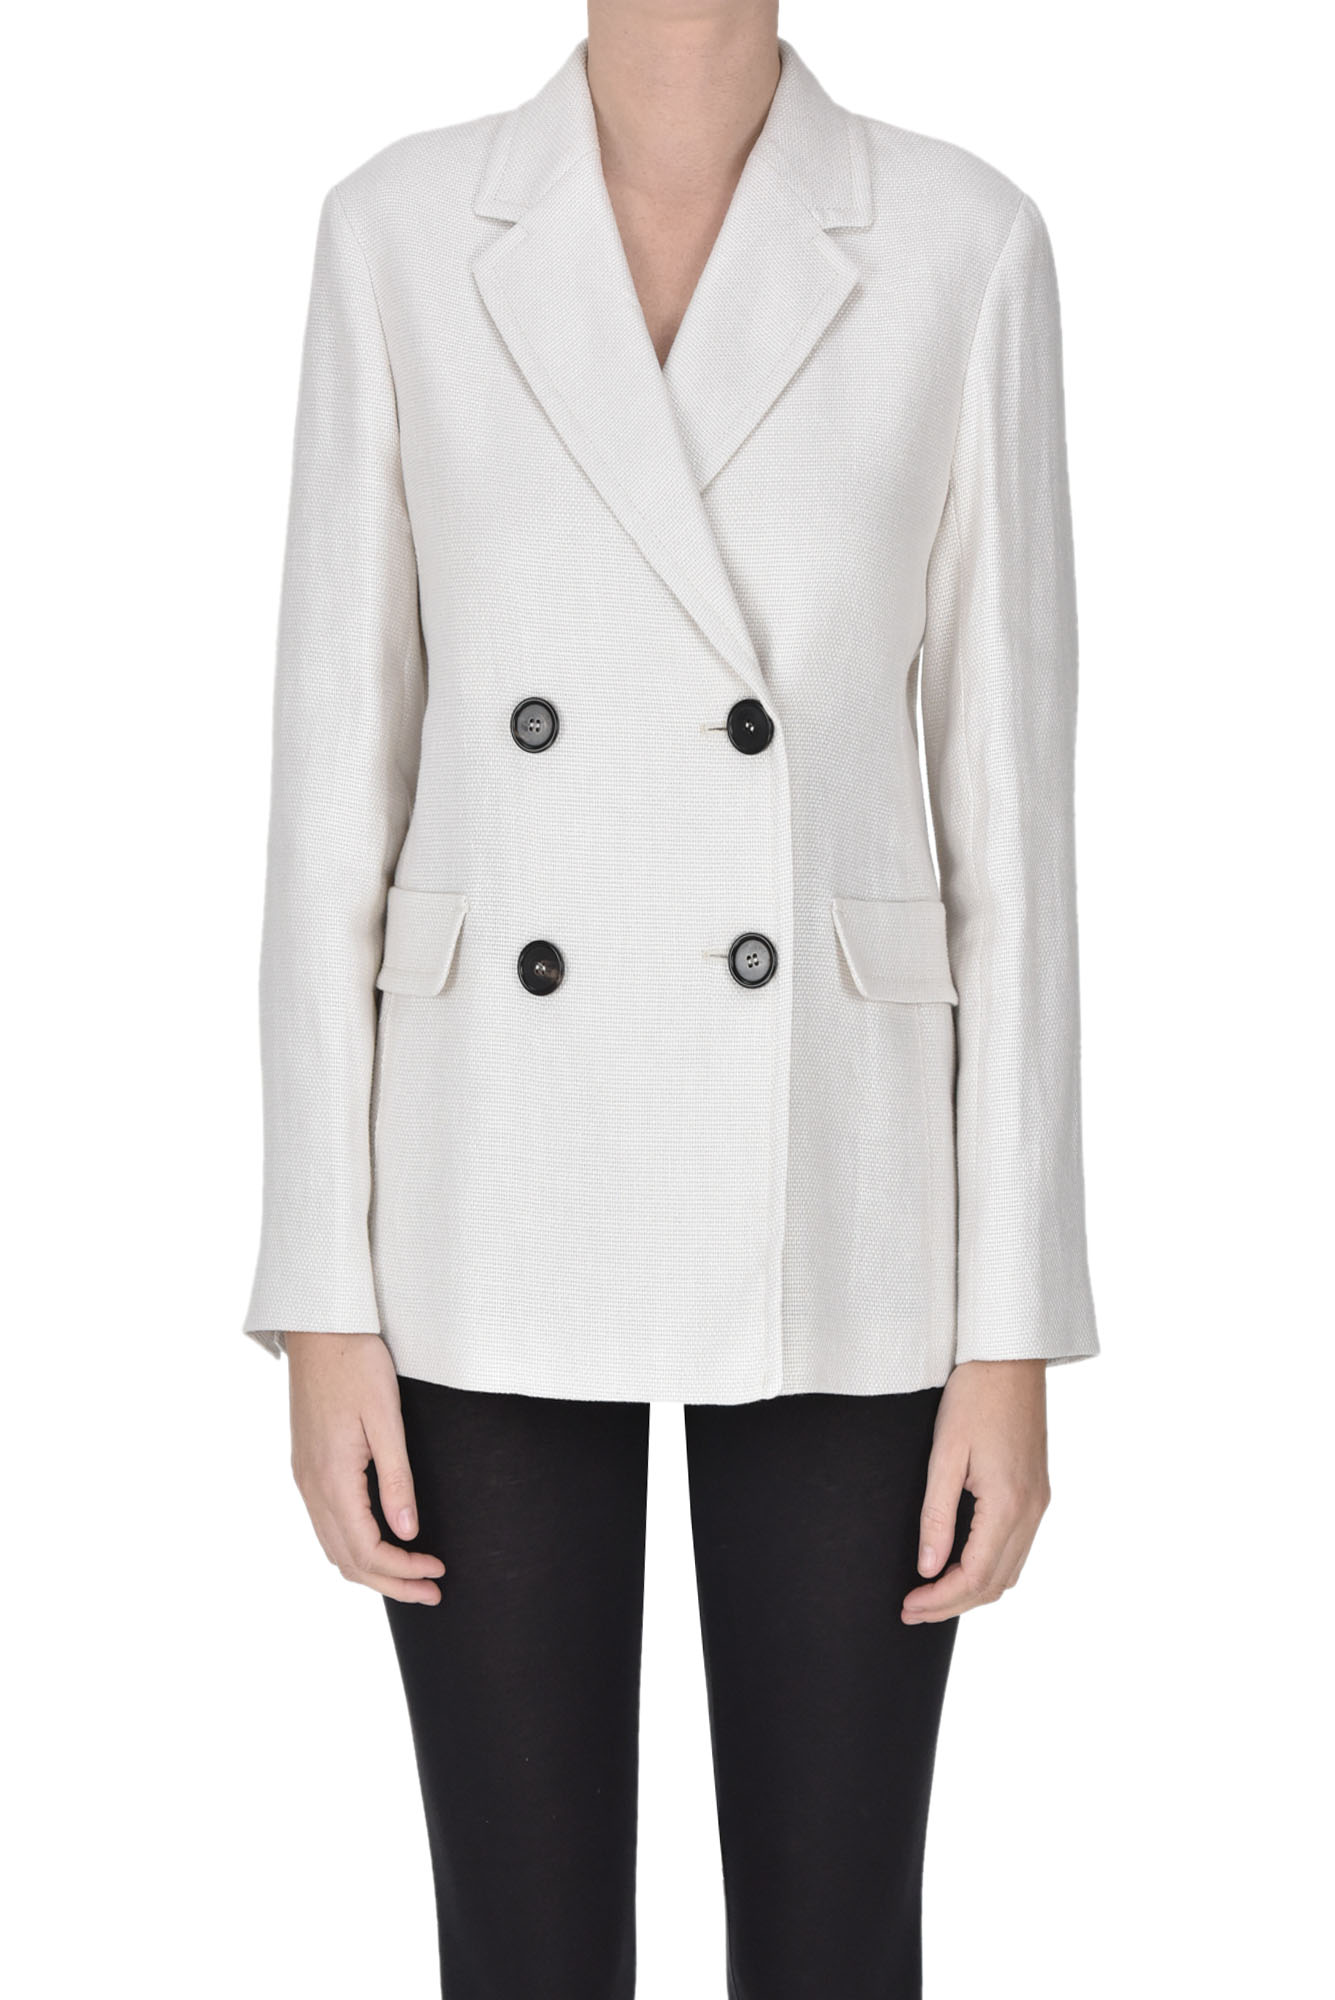 's Max Mara Oliver Double-breasted Blazer In Ivory